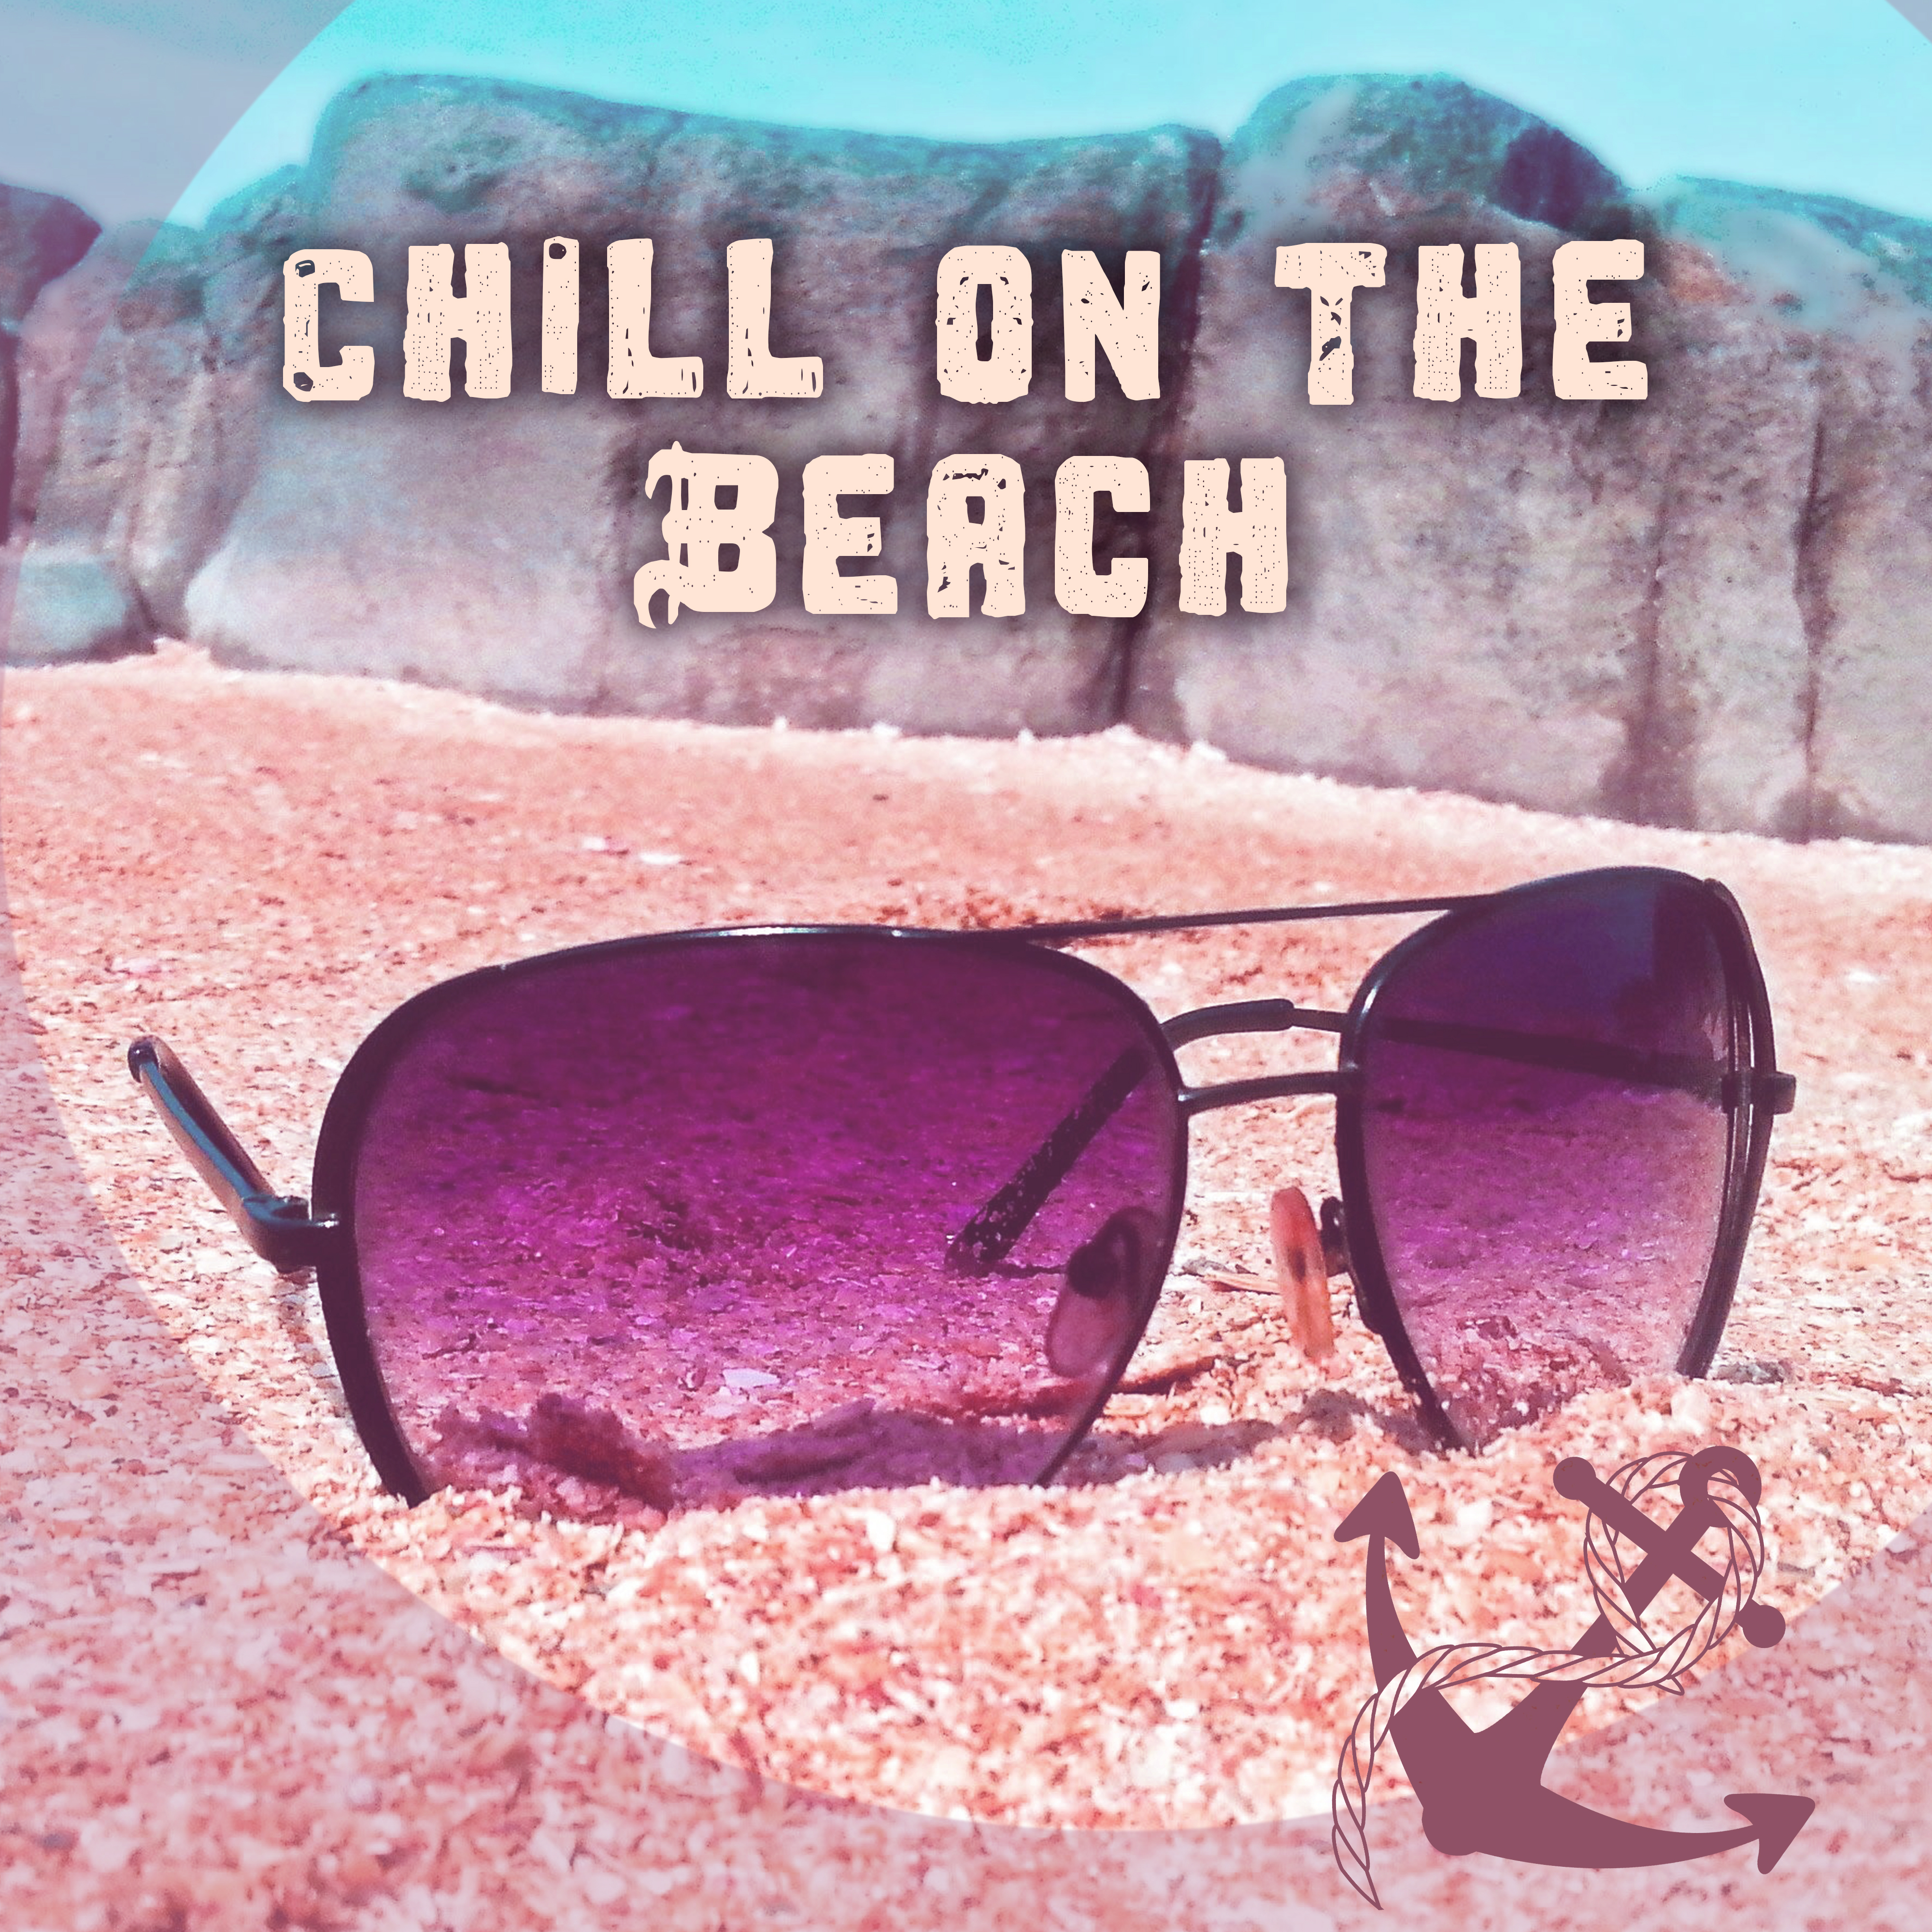 Chill on the Beach – Relaxing Summer Time, Peaceful Music, Chill Out Sounds, Calm Yourself